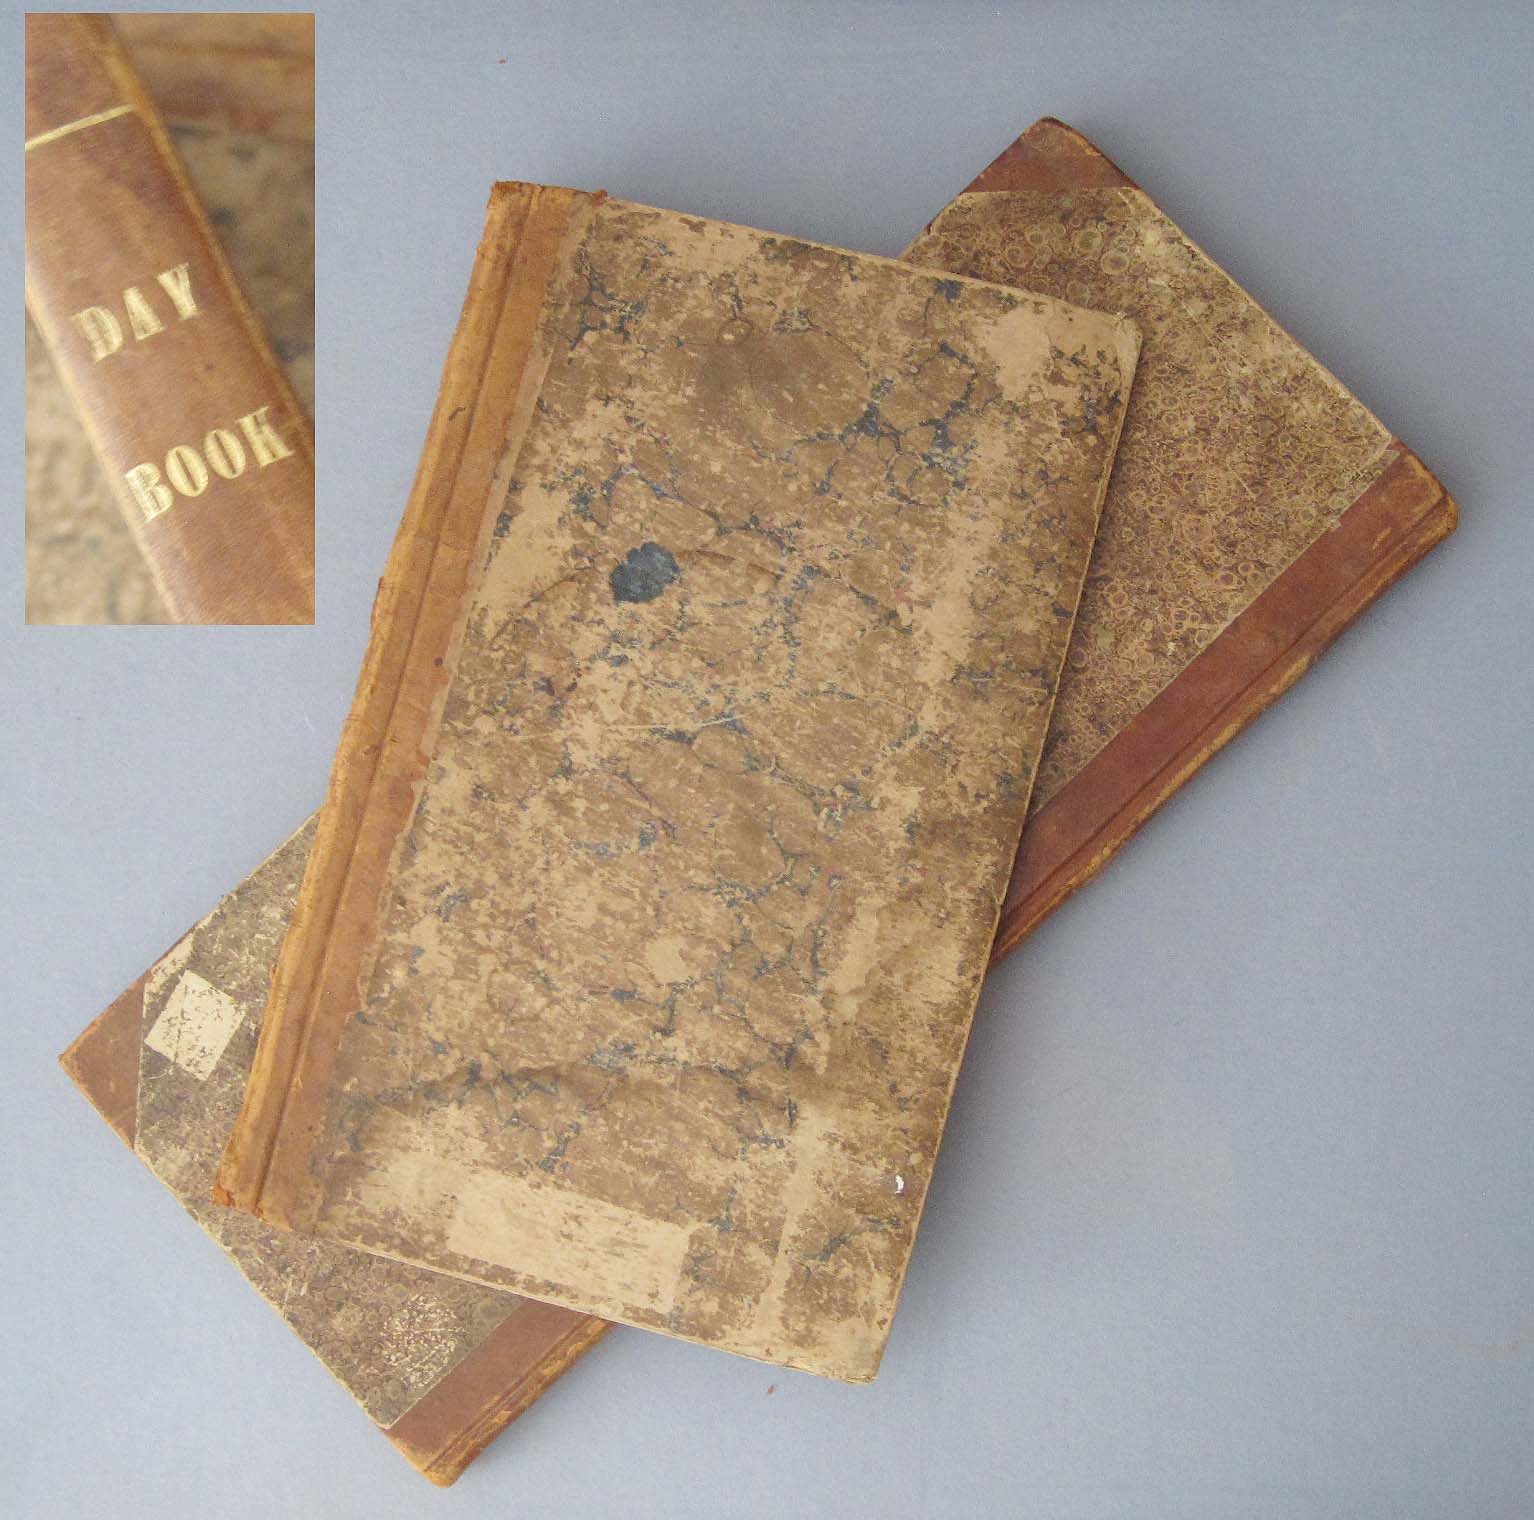 Two Mid-19th Century Manuscript Day Books Belonging to a Maine Physician